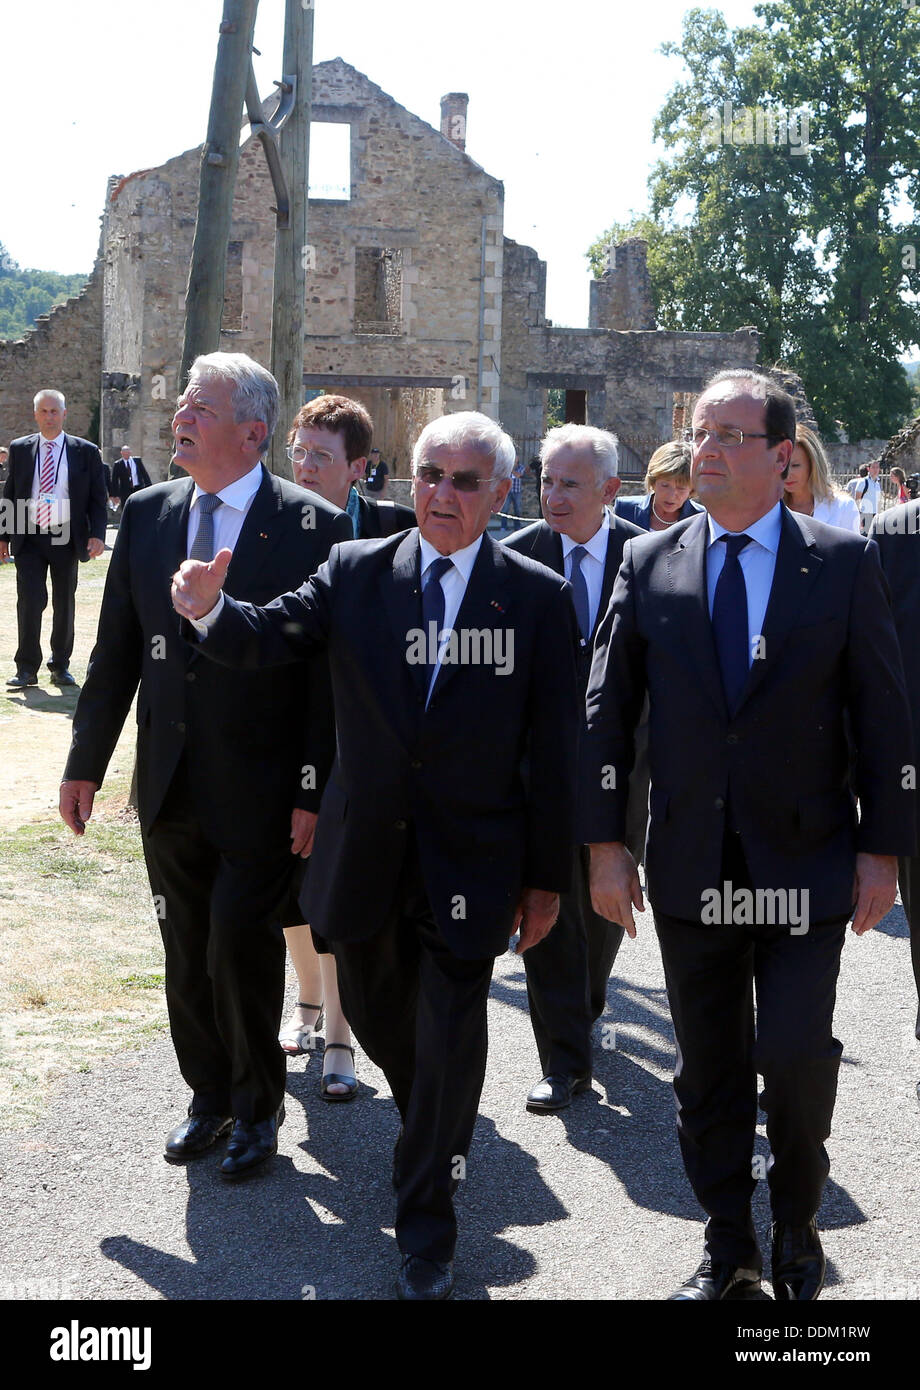 Oradour-sur-Glane, France. 04th Sep, 2013. German President Joachim Gauck (L), French President Francois Hollande and survivor of the massacre in Oradour-sur-Glane during World War II Robert Hebras (R) are pictured at the memorial site in Oradour-sur-Glane, France, 04 September 2013. A unit of SS officers murdered 642 citizens of the town in June 1944. The German President is on a three-day visit to France. Photo: WOLFGANG KUMM/dpa/Alamy Live News Stock Photo